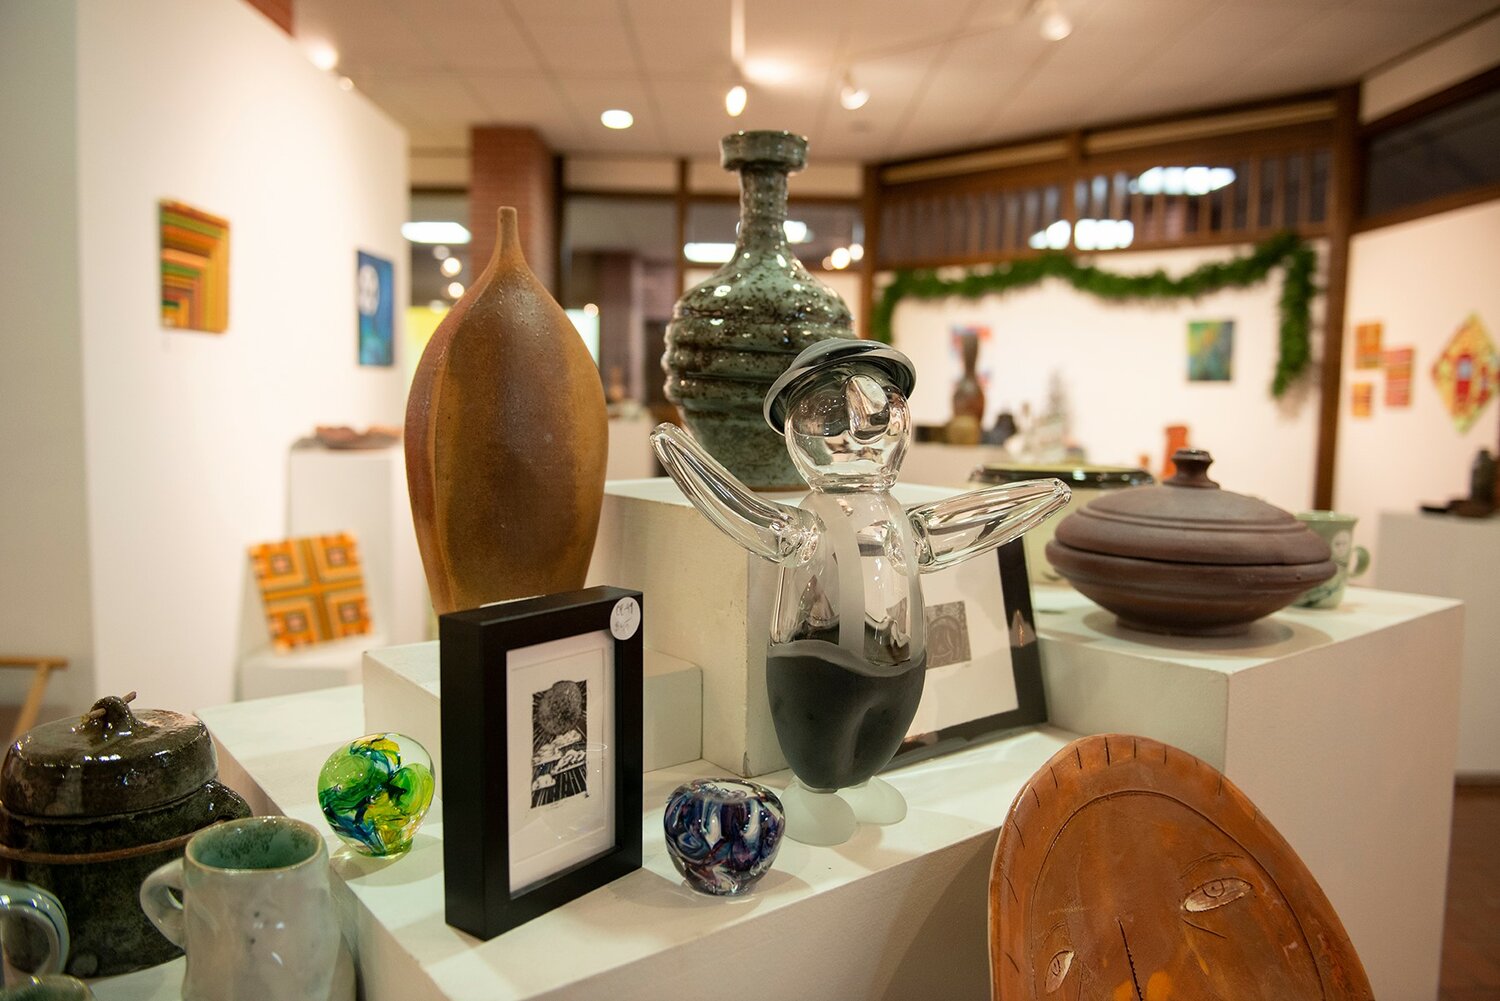 One-of-a-kind gifts made by UW-River Falls Art Department students, faculty, and alumni will be up for sale at the annual Art Department Scholarship Sale Nov. 29-Dec. 8 in Gallery 101 in the Kleinpell Fine Arts building on campus. Sale hours are 10 a.m. to 7 p.m. (closed Dec. 3).